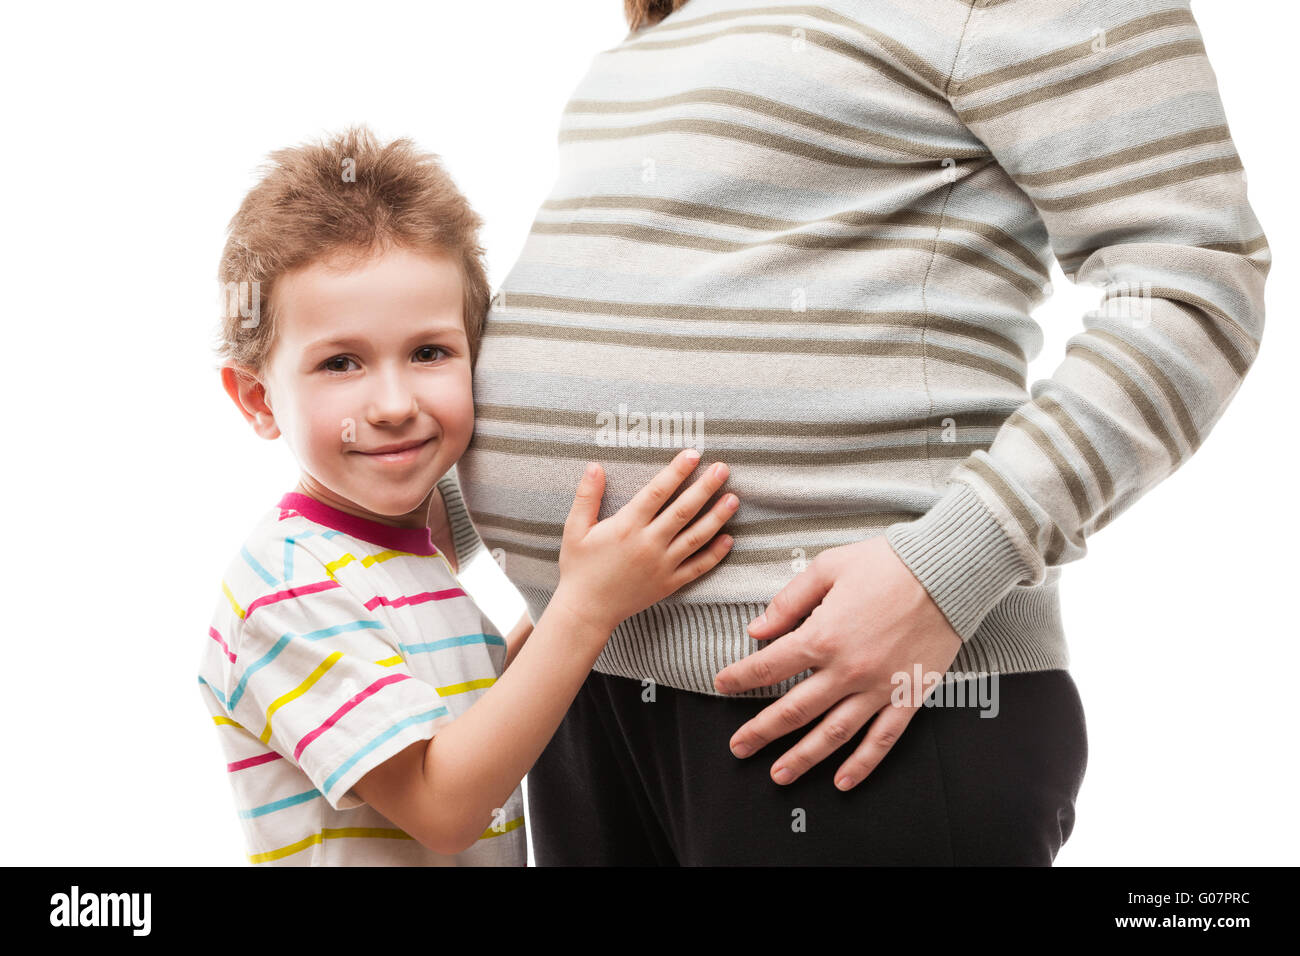 Little son touching or bonding his pregnant mother Stock Photo